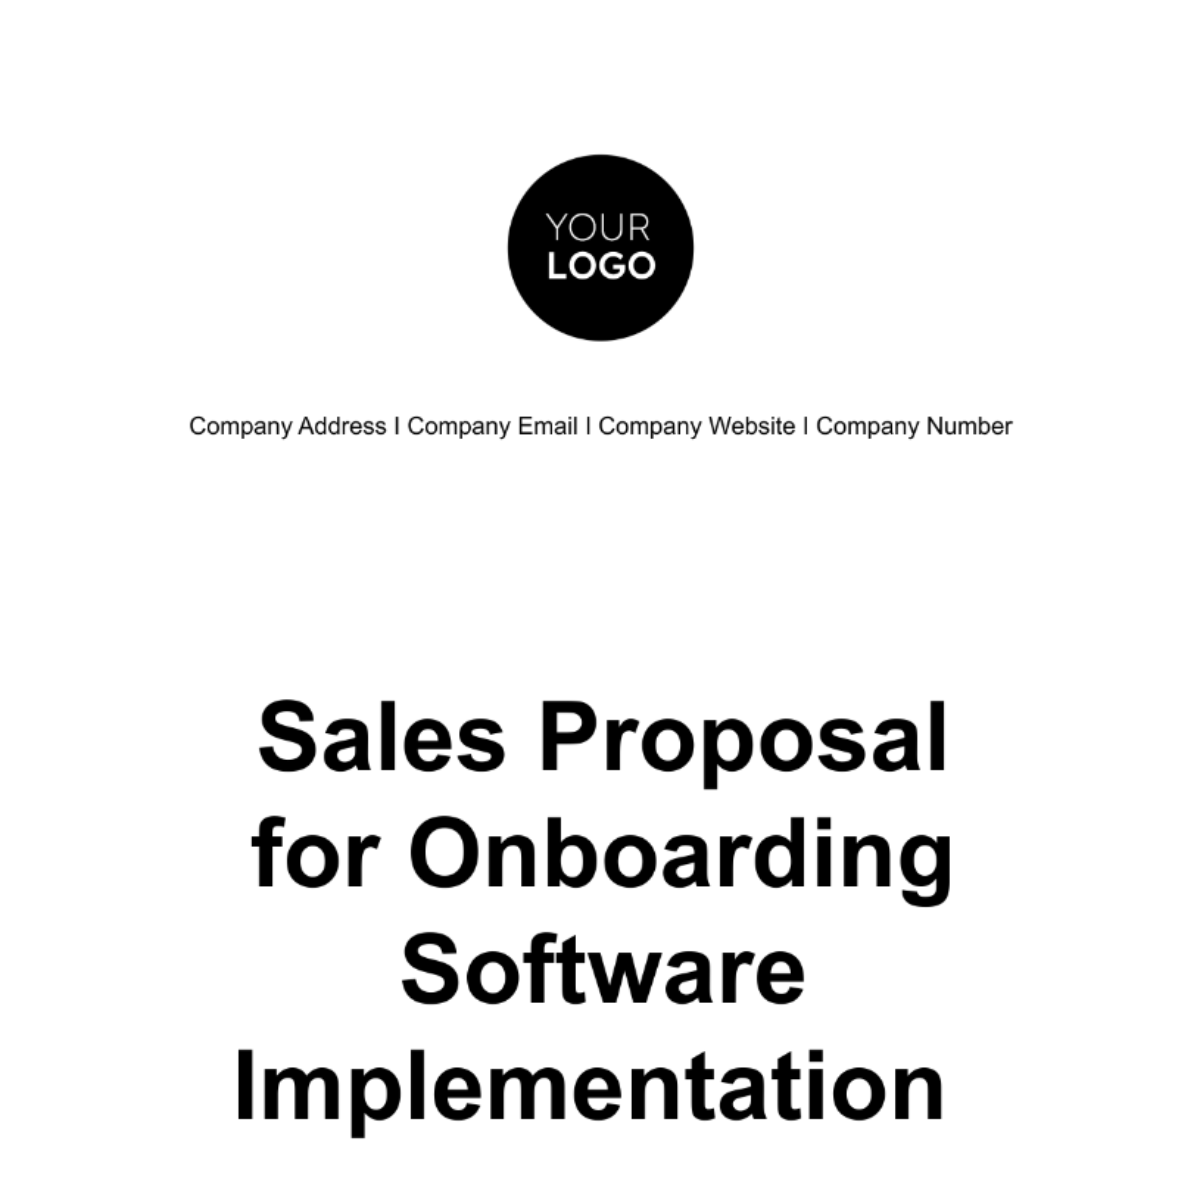 Sales Proposal for Onboarding Software Implementation Template